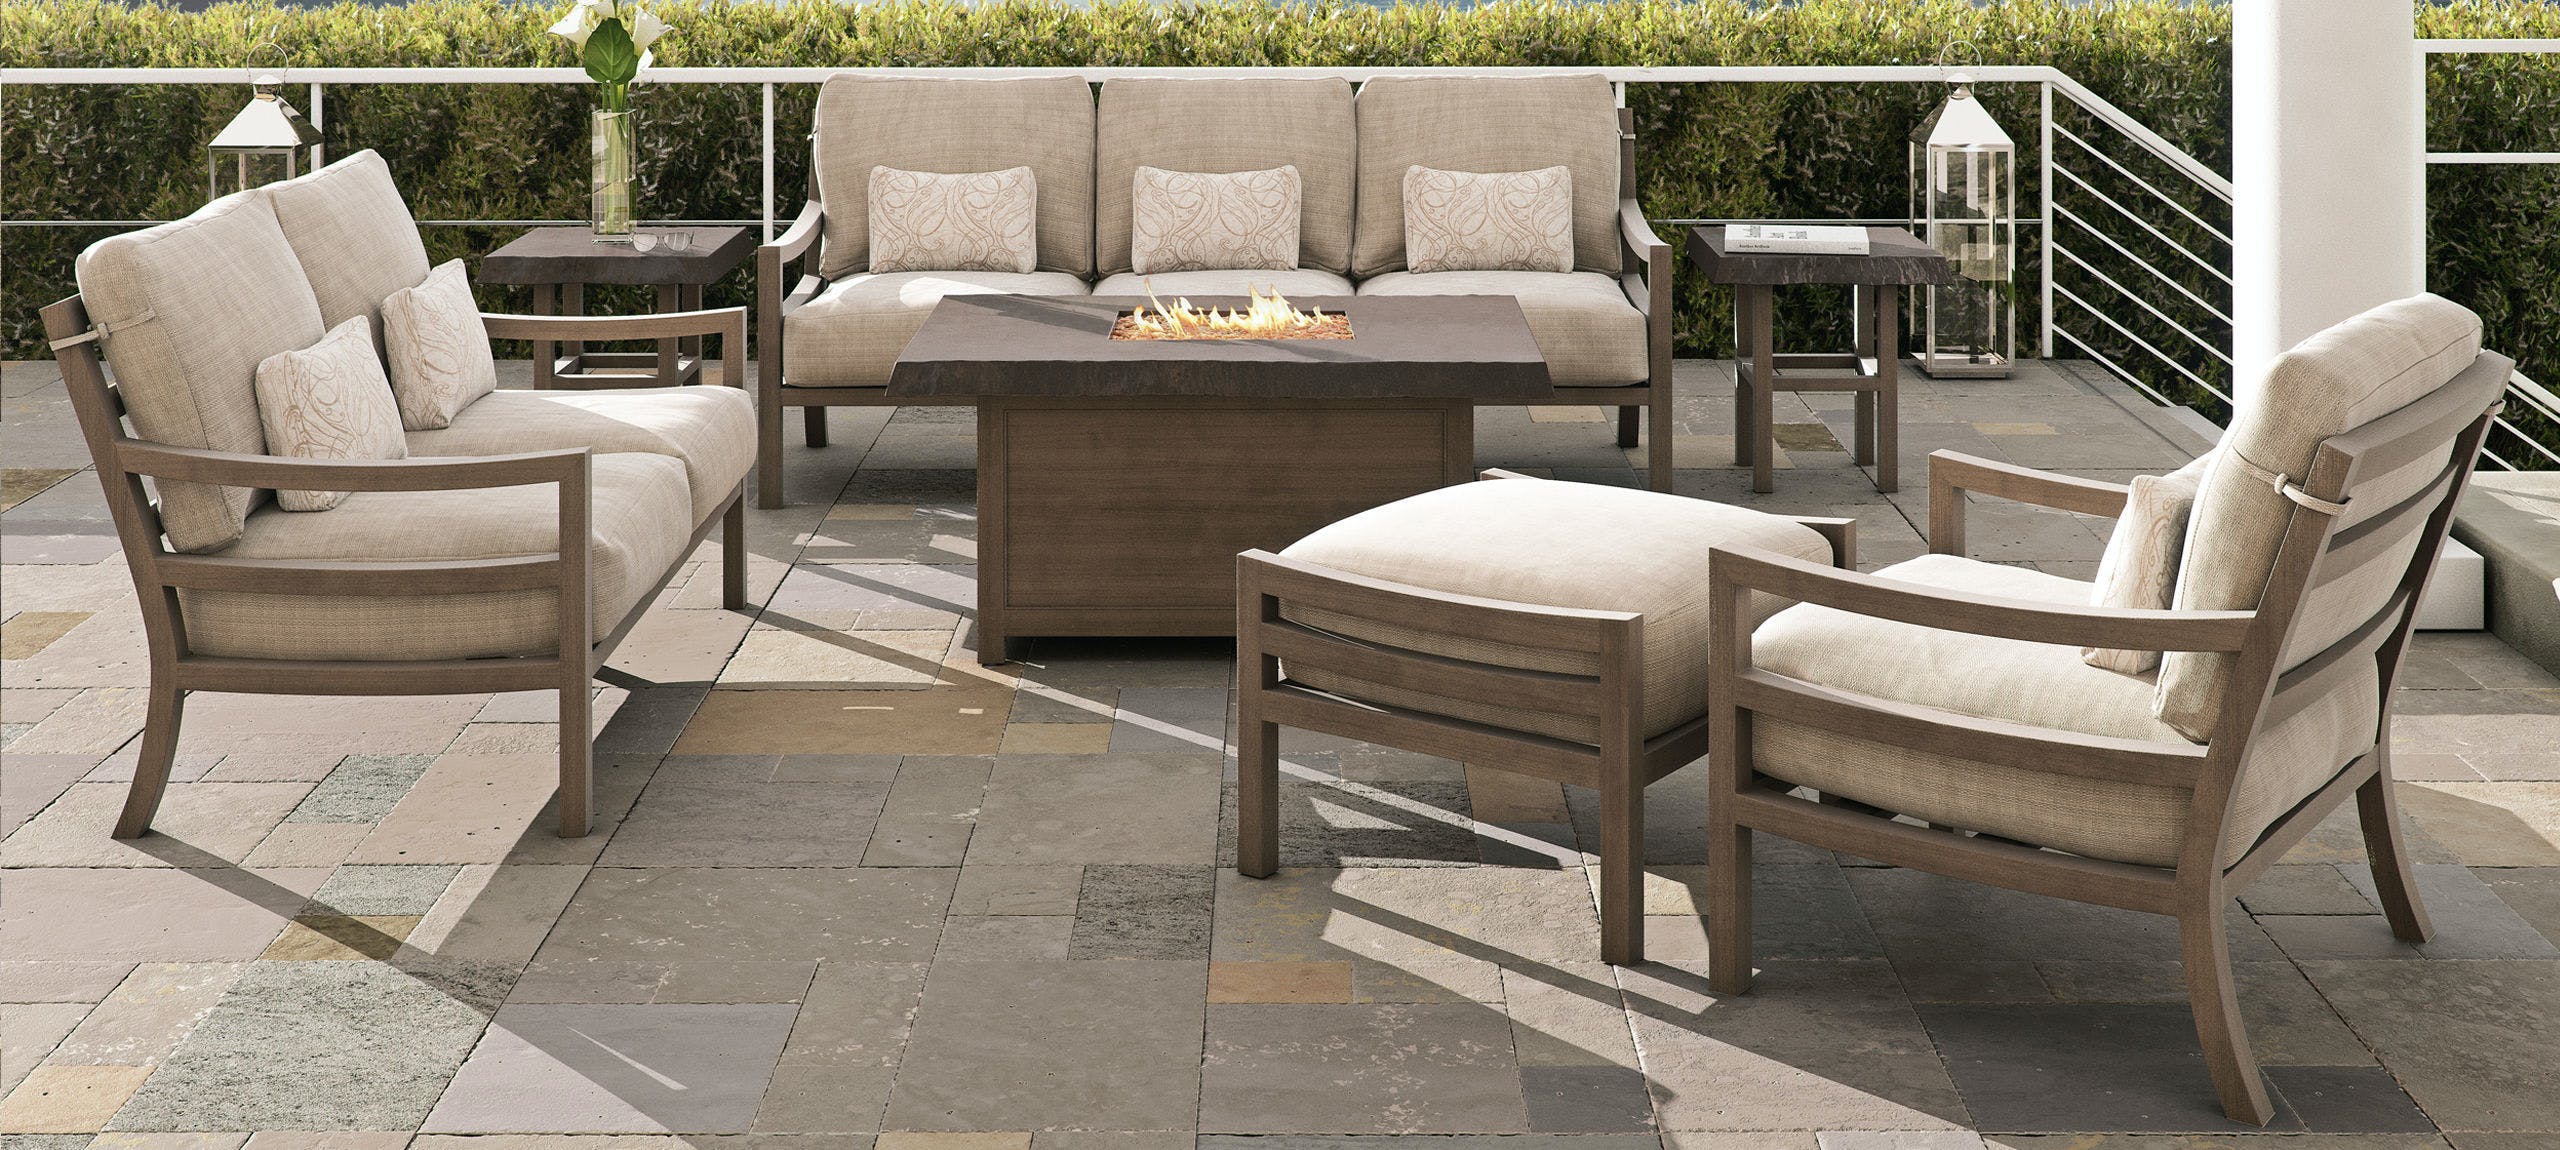 Roma Outdoor Furniture Set with Firepit Table By Castelle